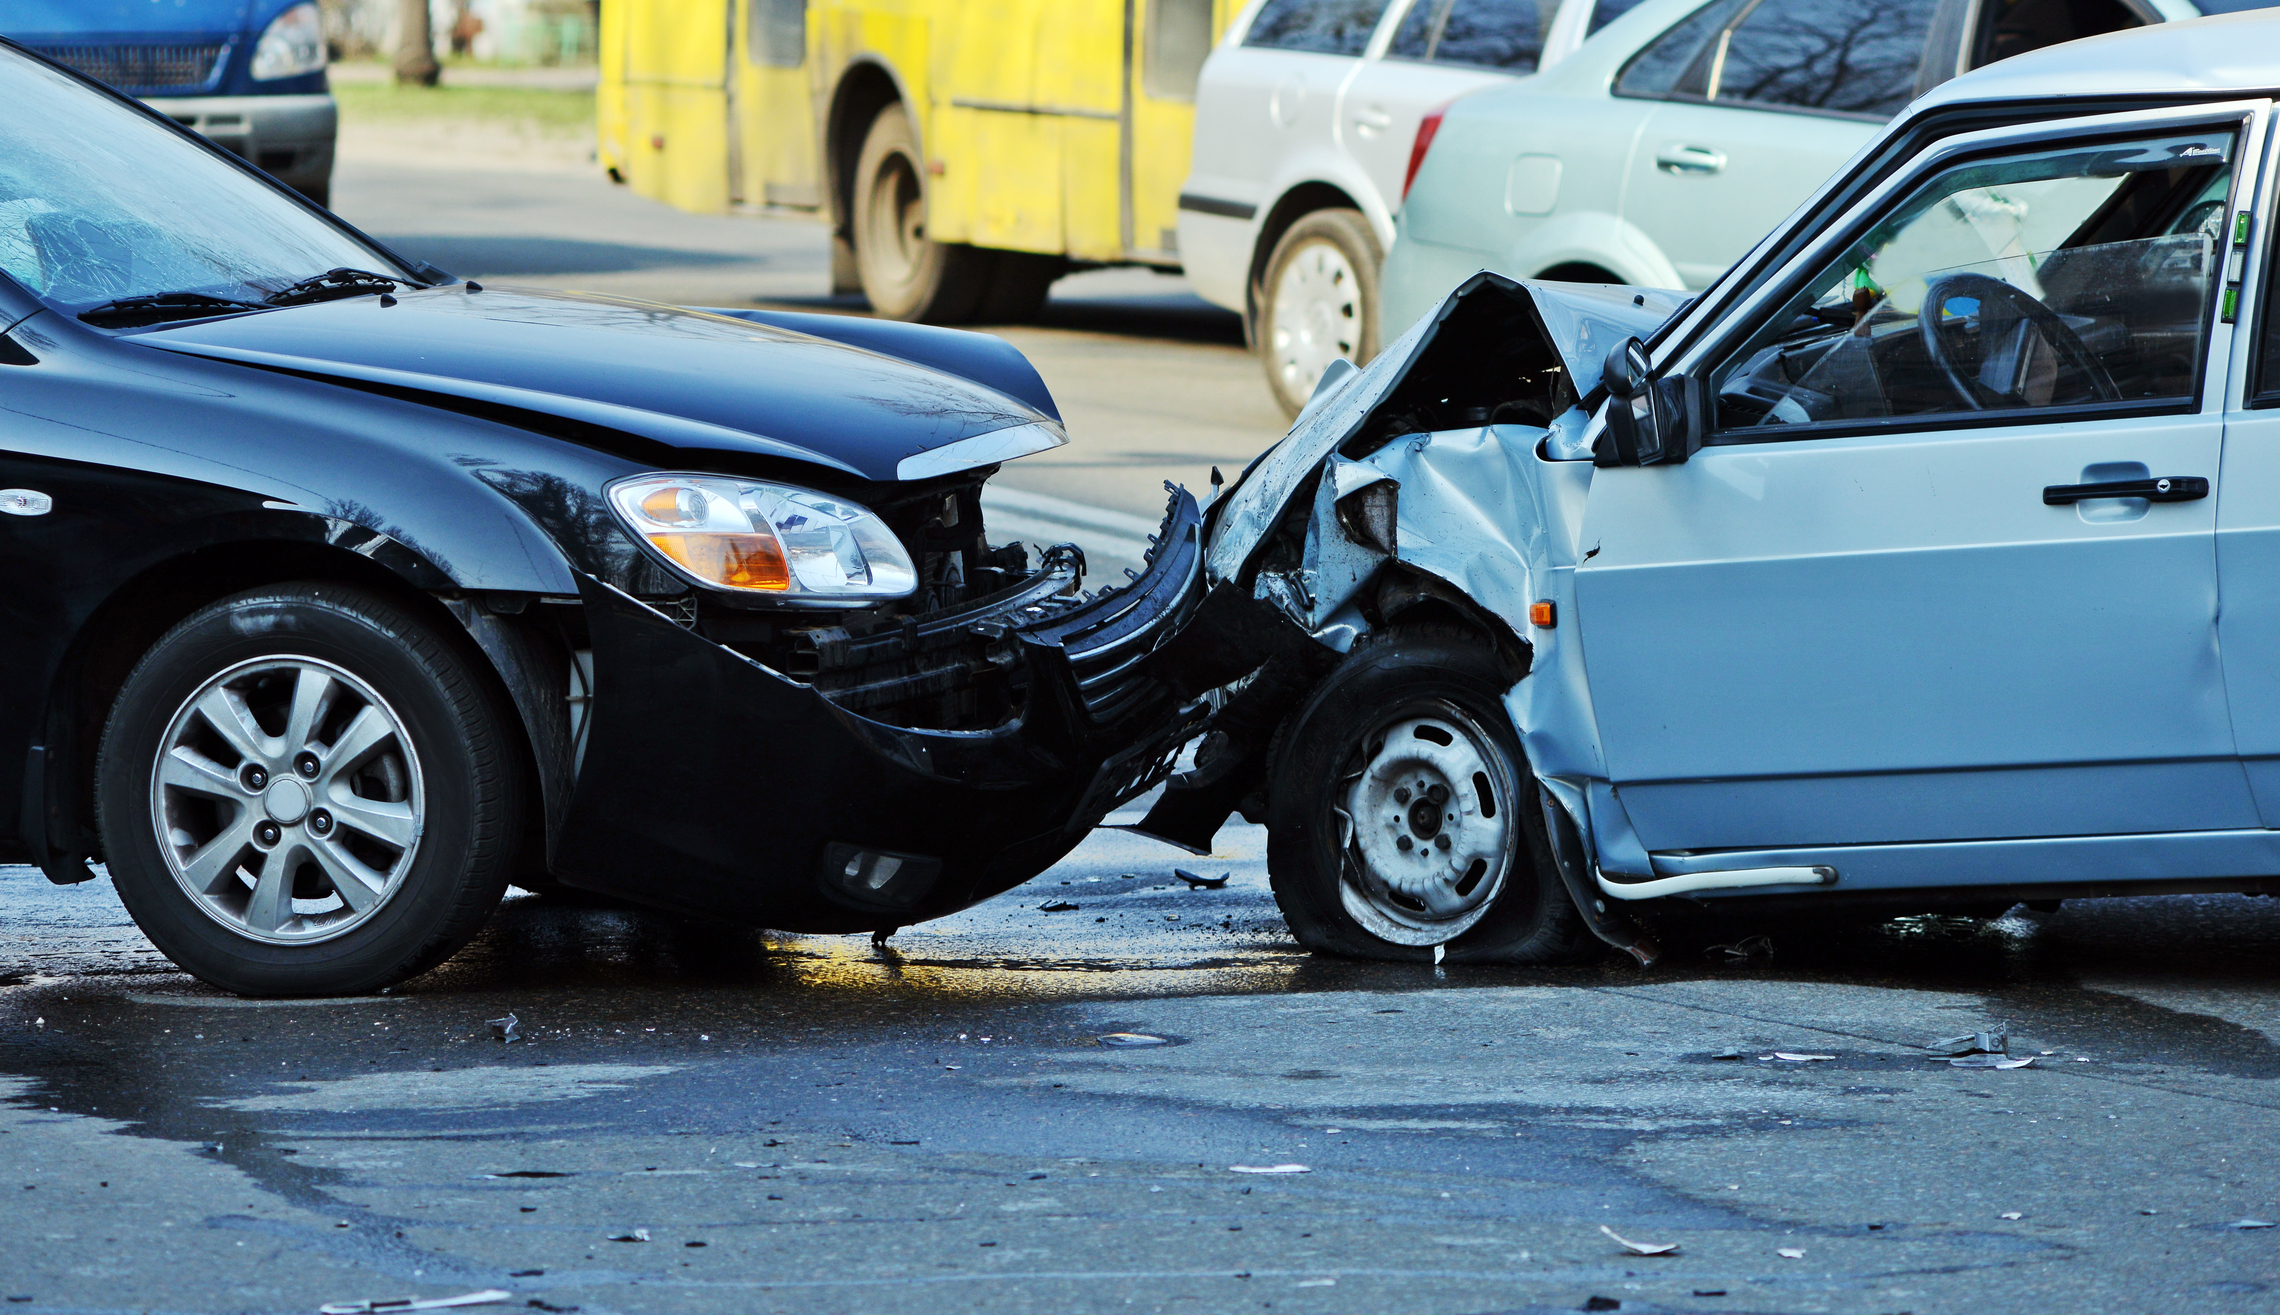 Should I Hire a Lawyer for a Minor Car Accident in West Virginia?